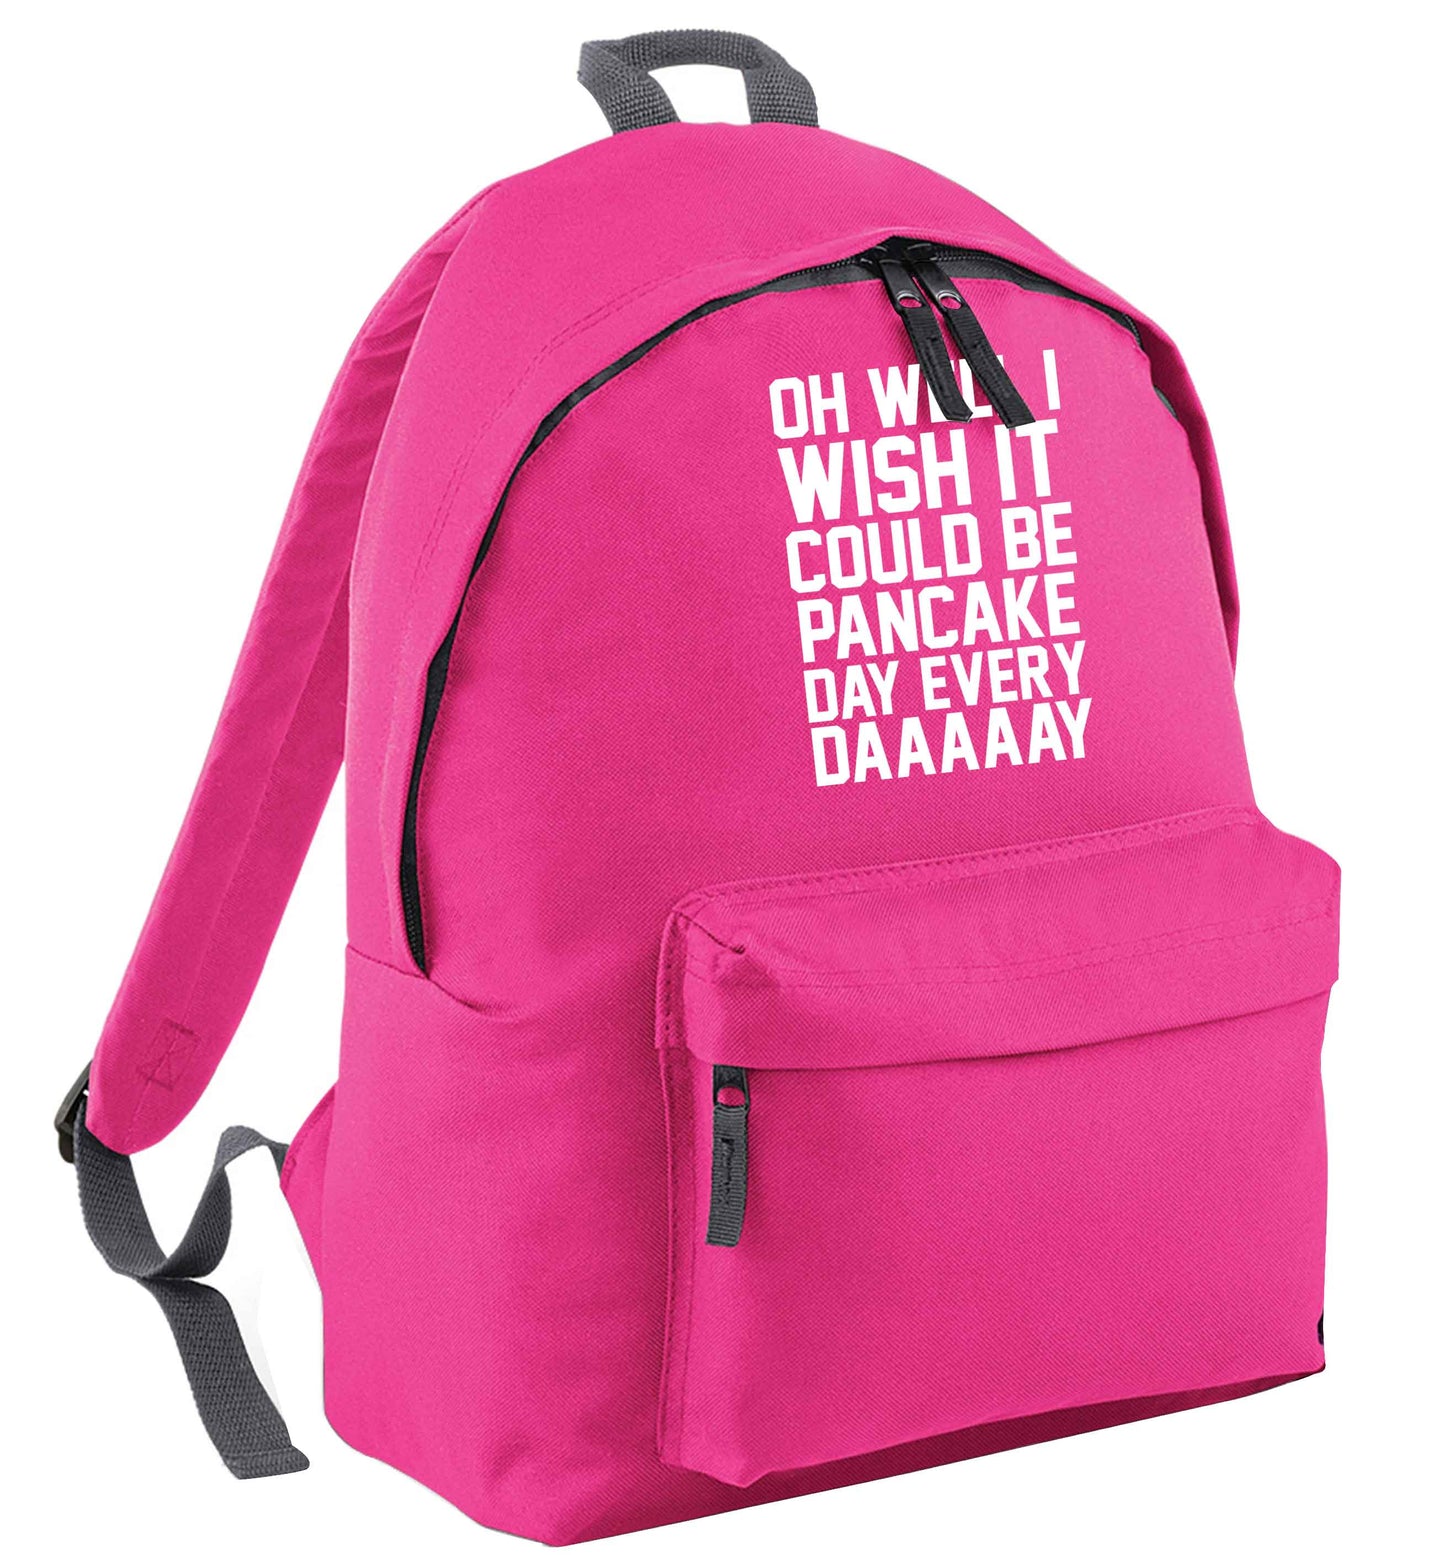 Oh well I wish it could be pancake day every day pink childrens backpack